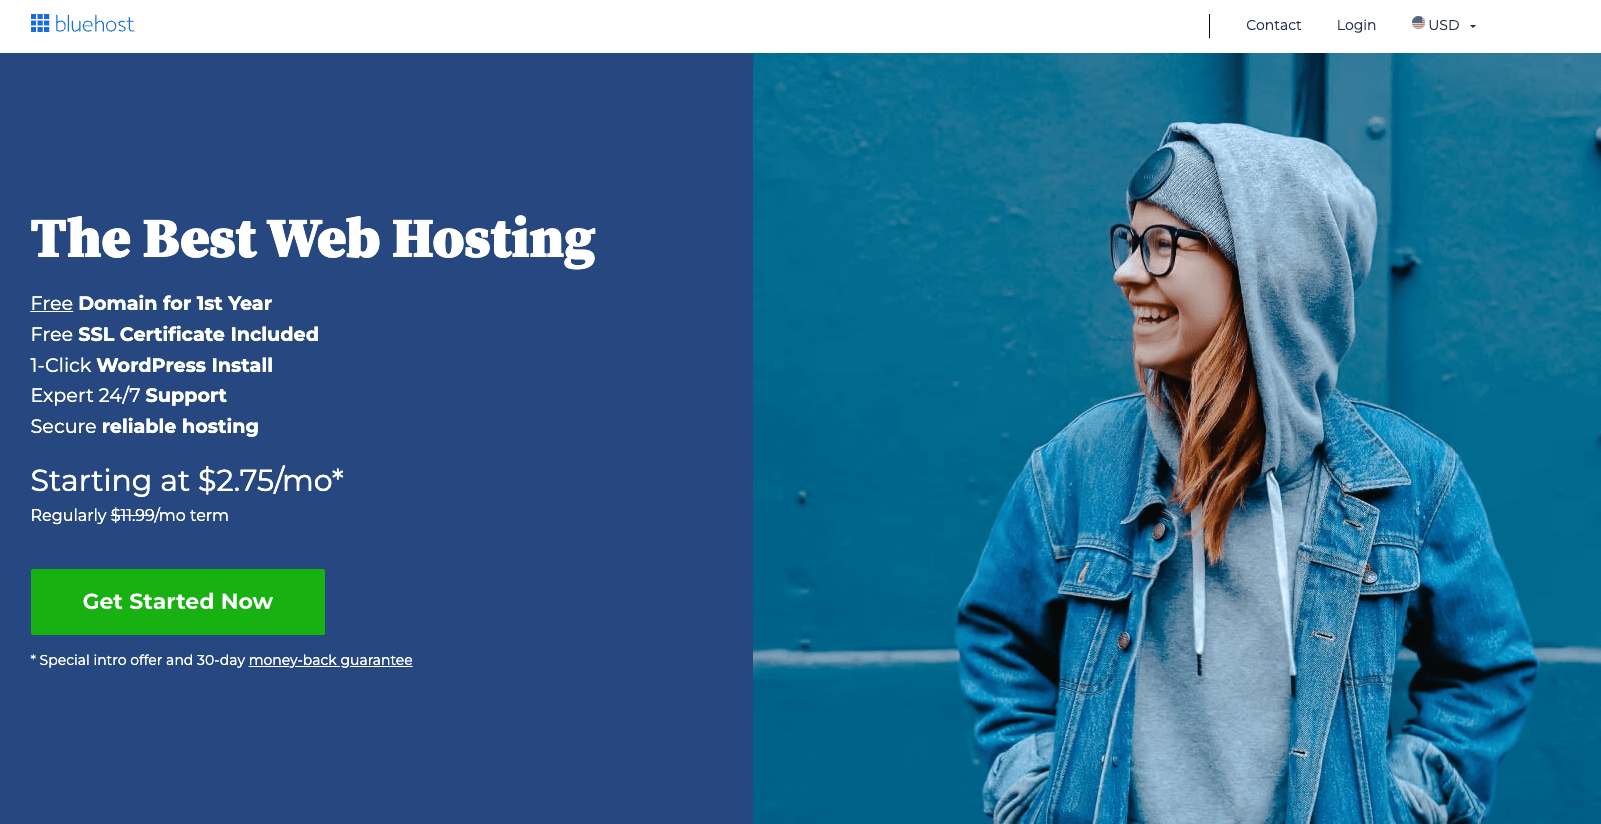 Bluehost offers free email hosting with their web hosting plans